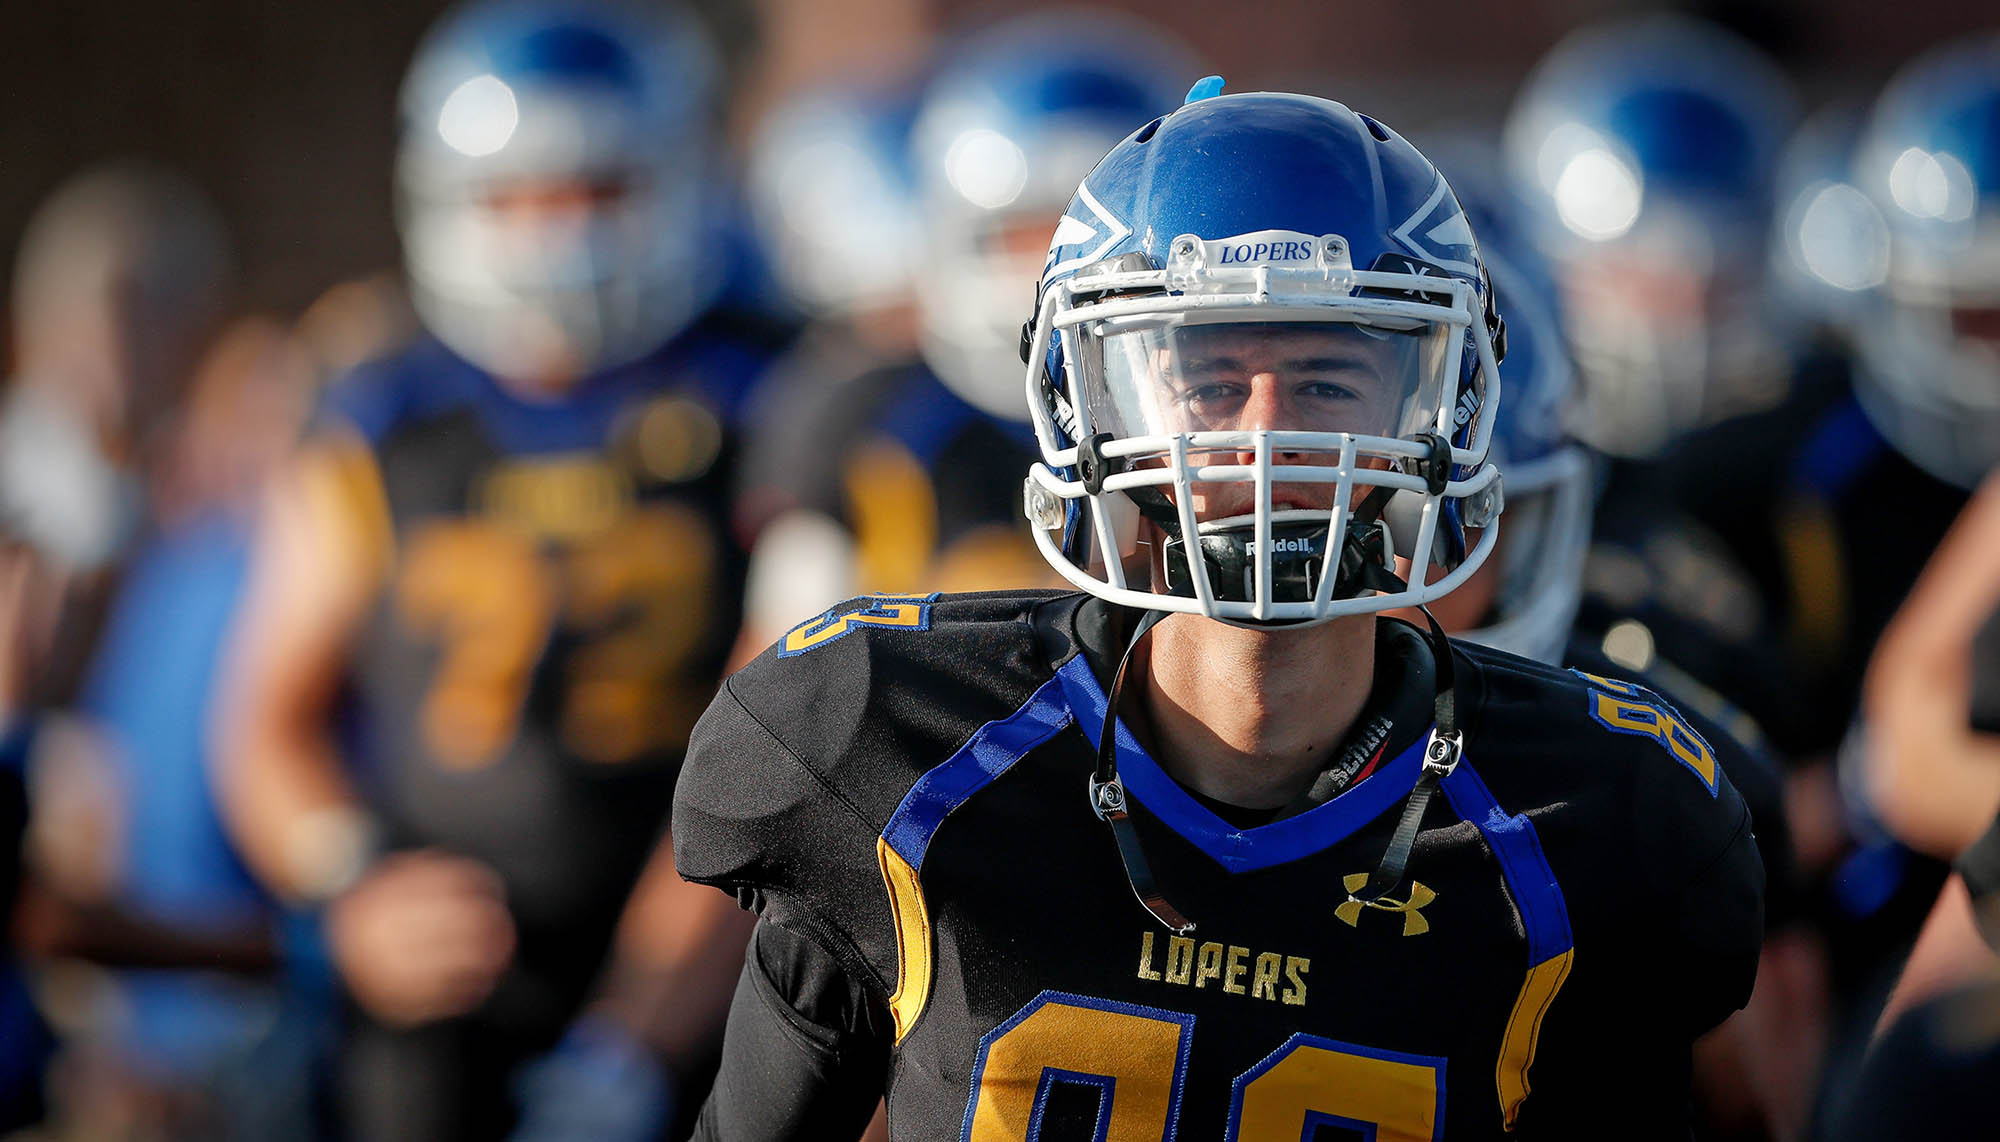 Mitch Carlson received the UNK football team’s Offensive Leader of the Pack Award in 2018 for his leadership and dedication. (Photo by Corbey R. Dorsey, UNK Communications)